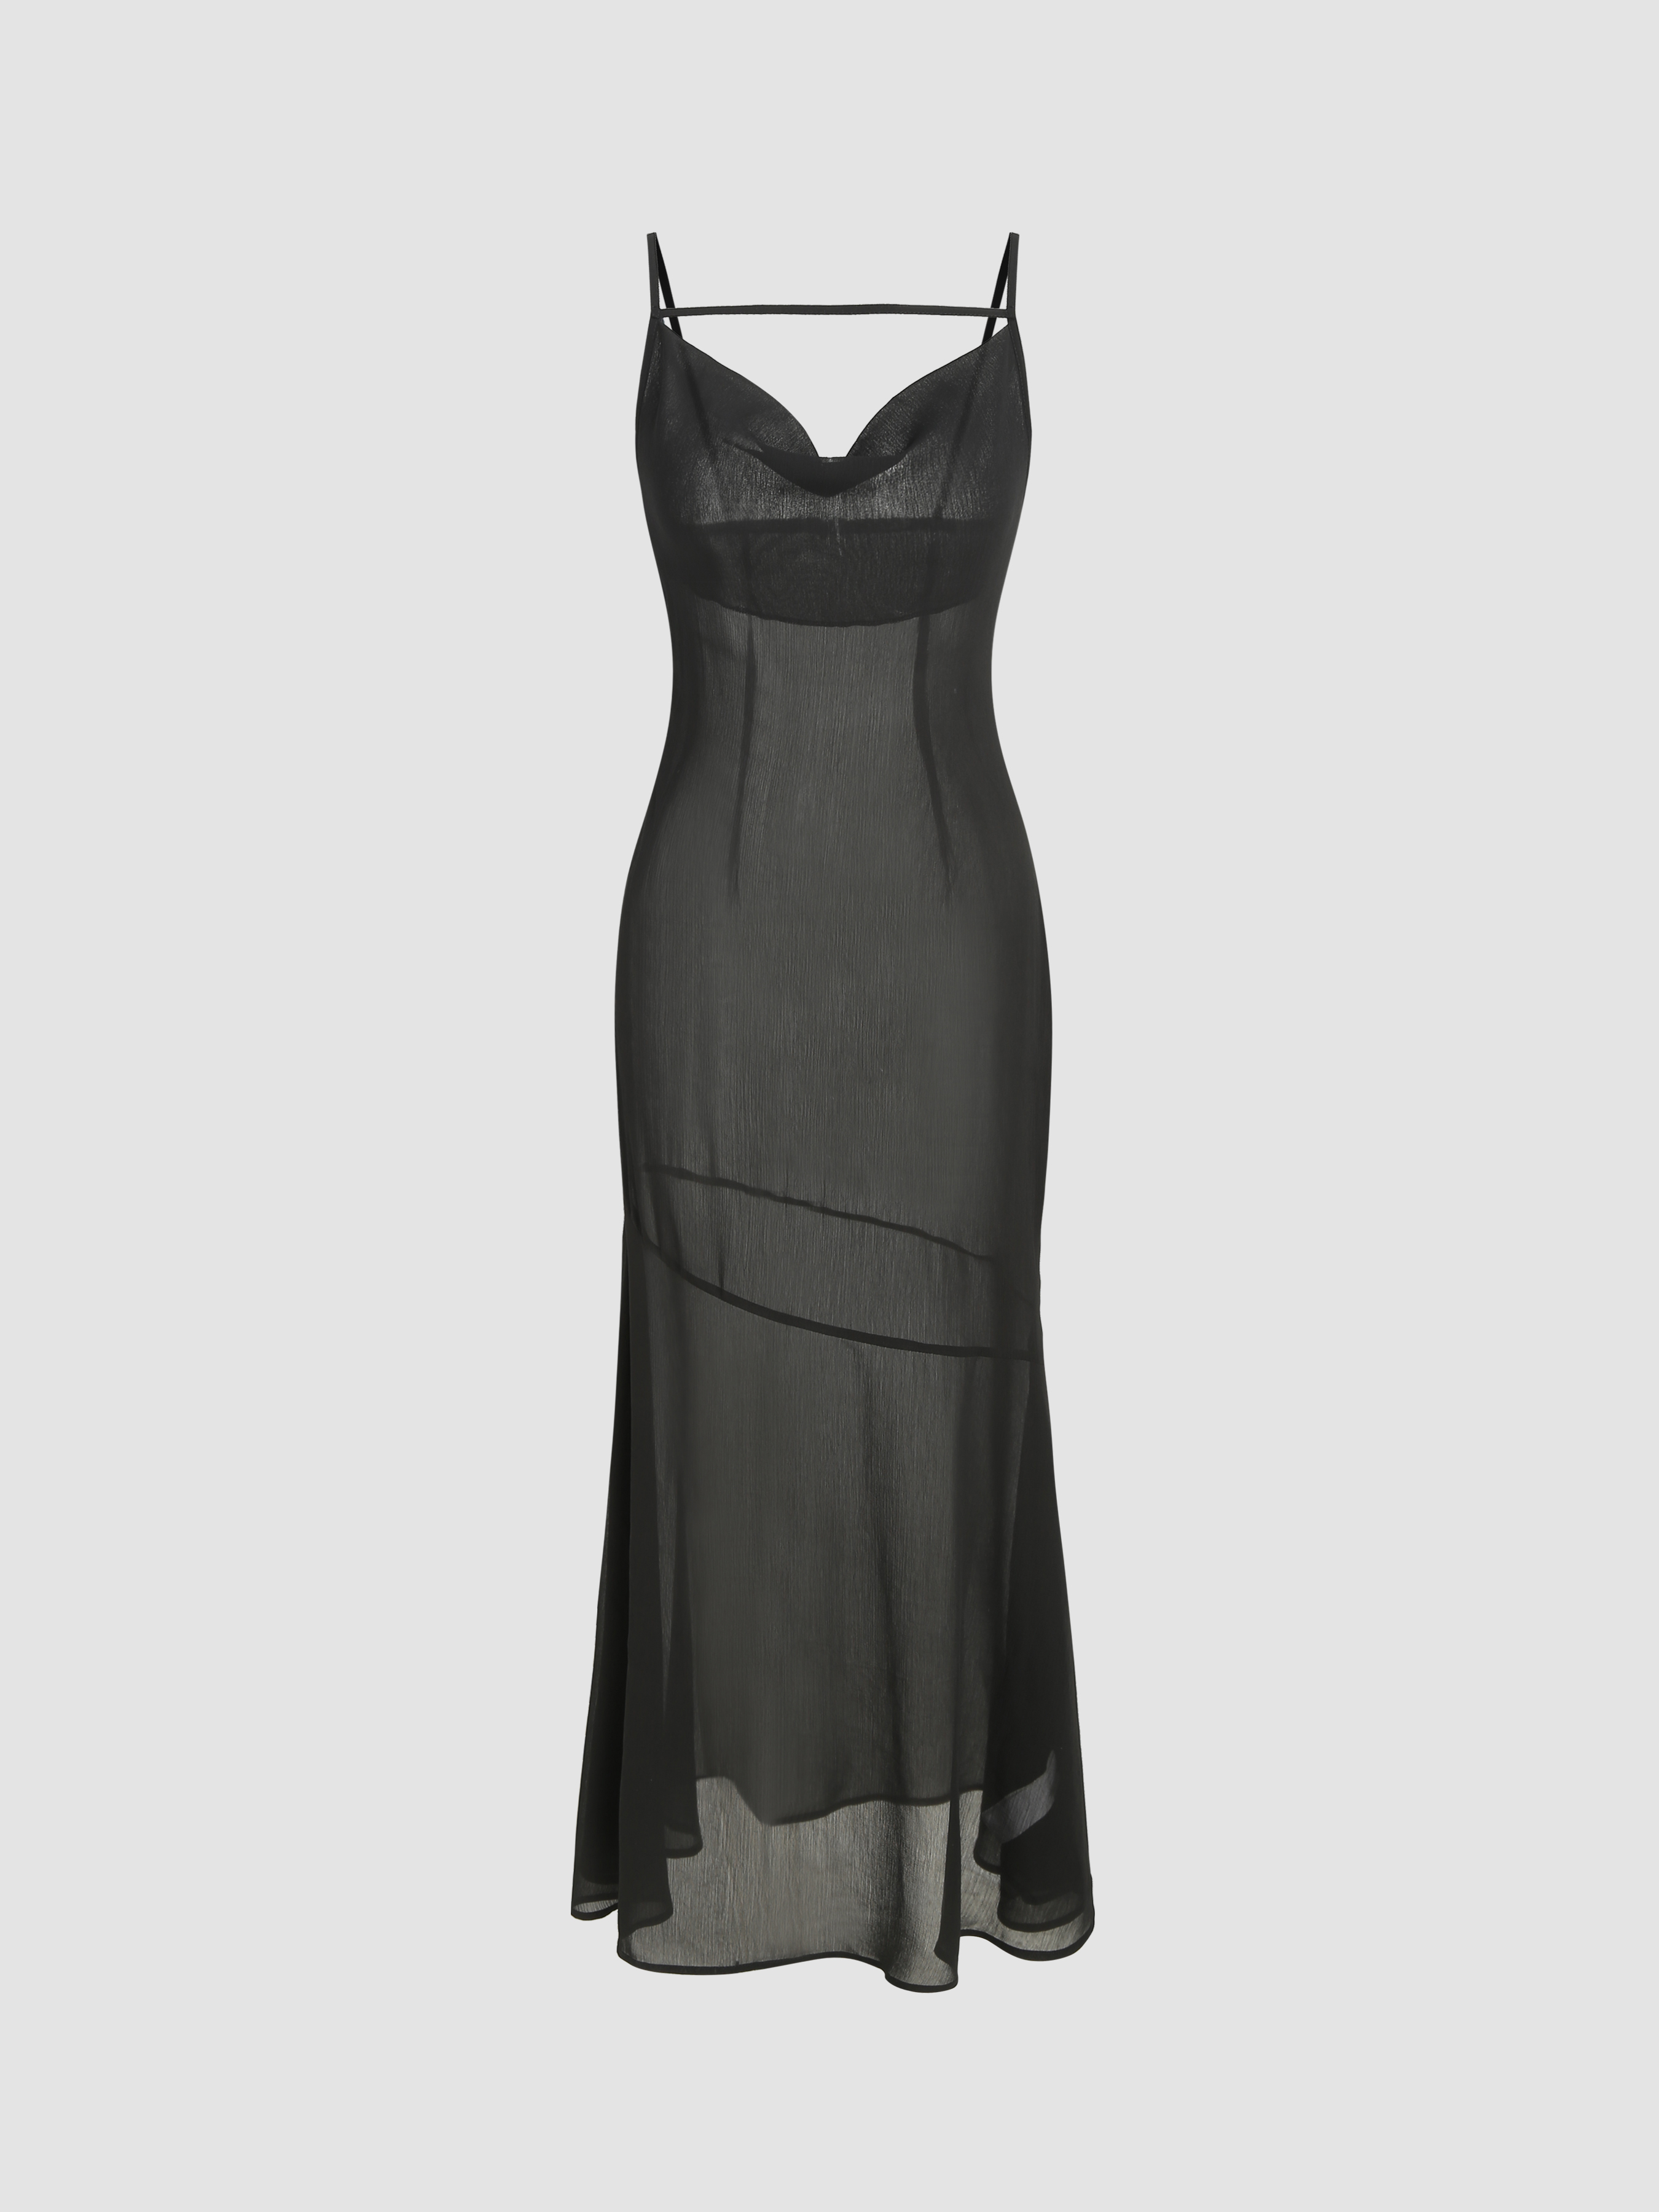 Mesh Cowl Neck Sheer Maxi Dress For Daily Casual Date Party/Clubbing